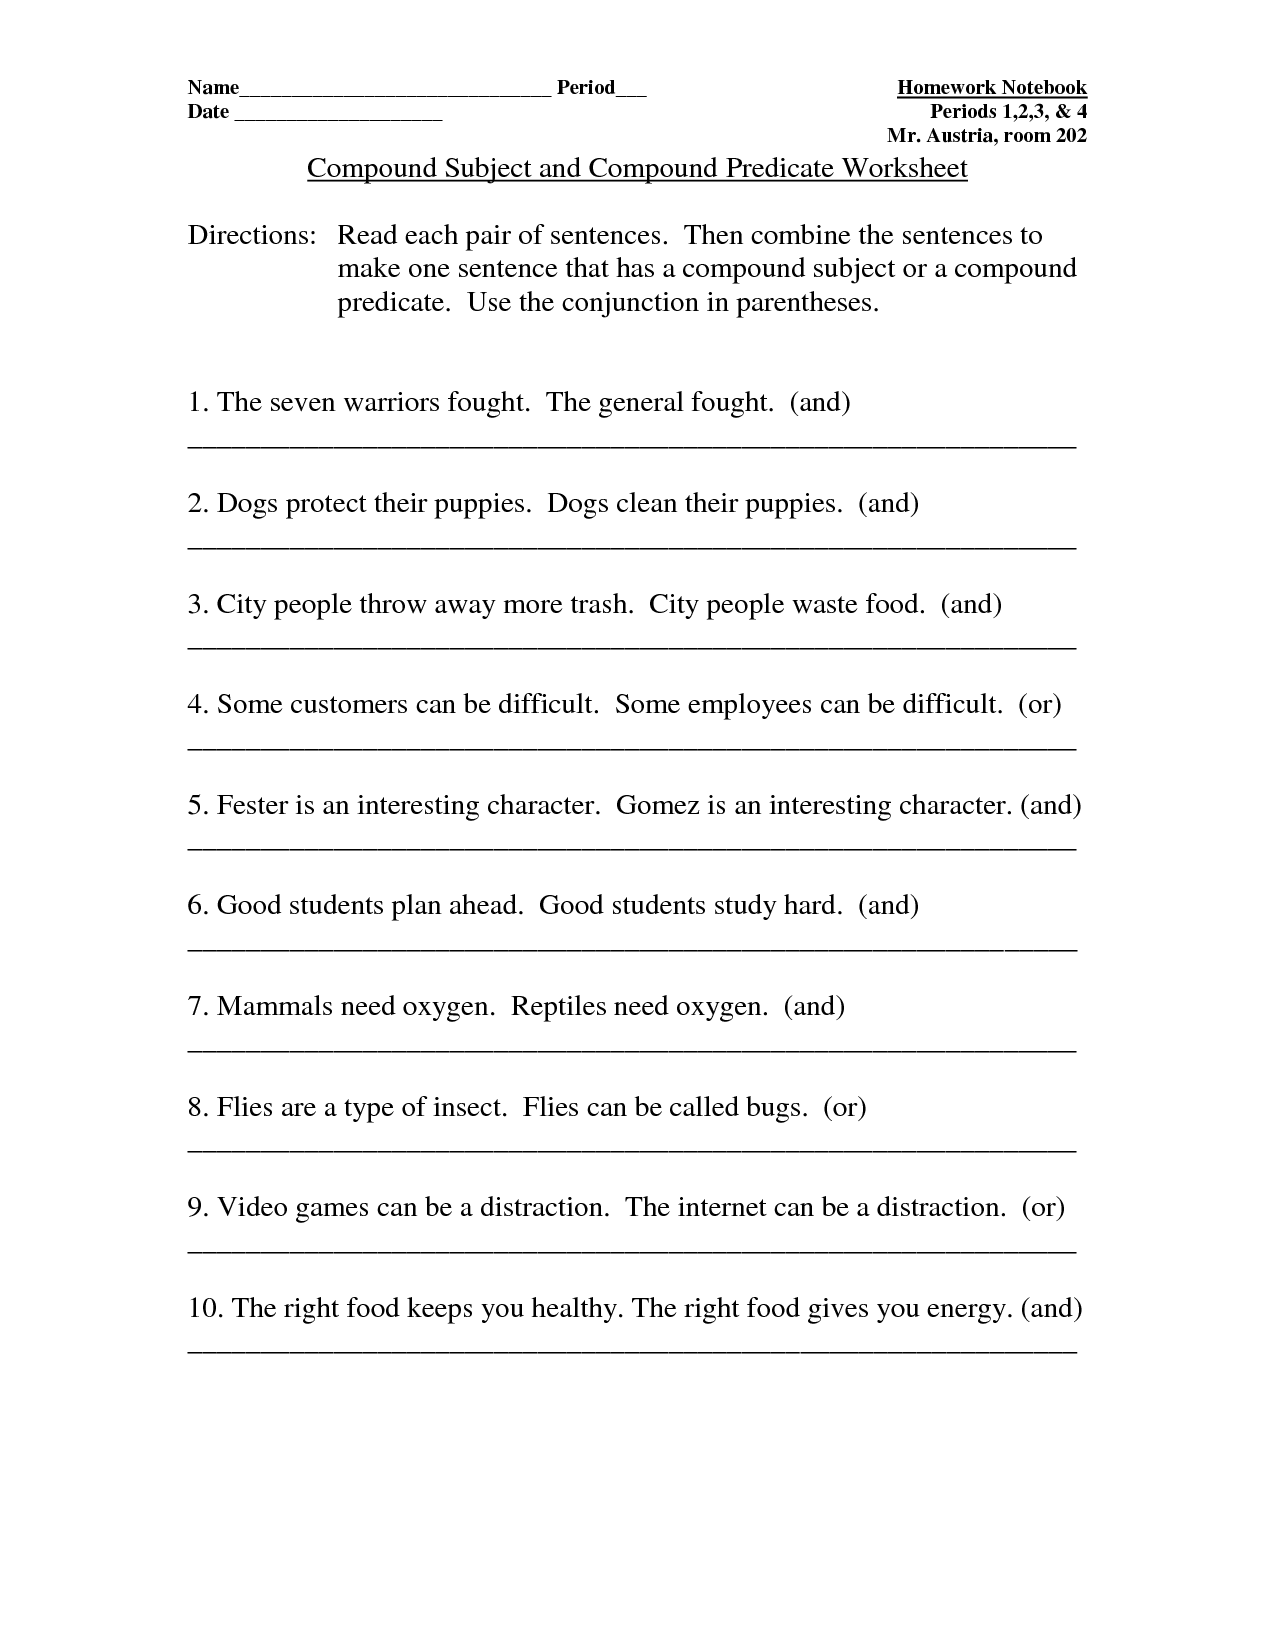 Simple and Compound Subjects Worksheets